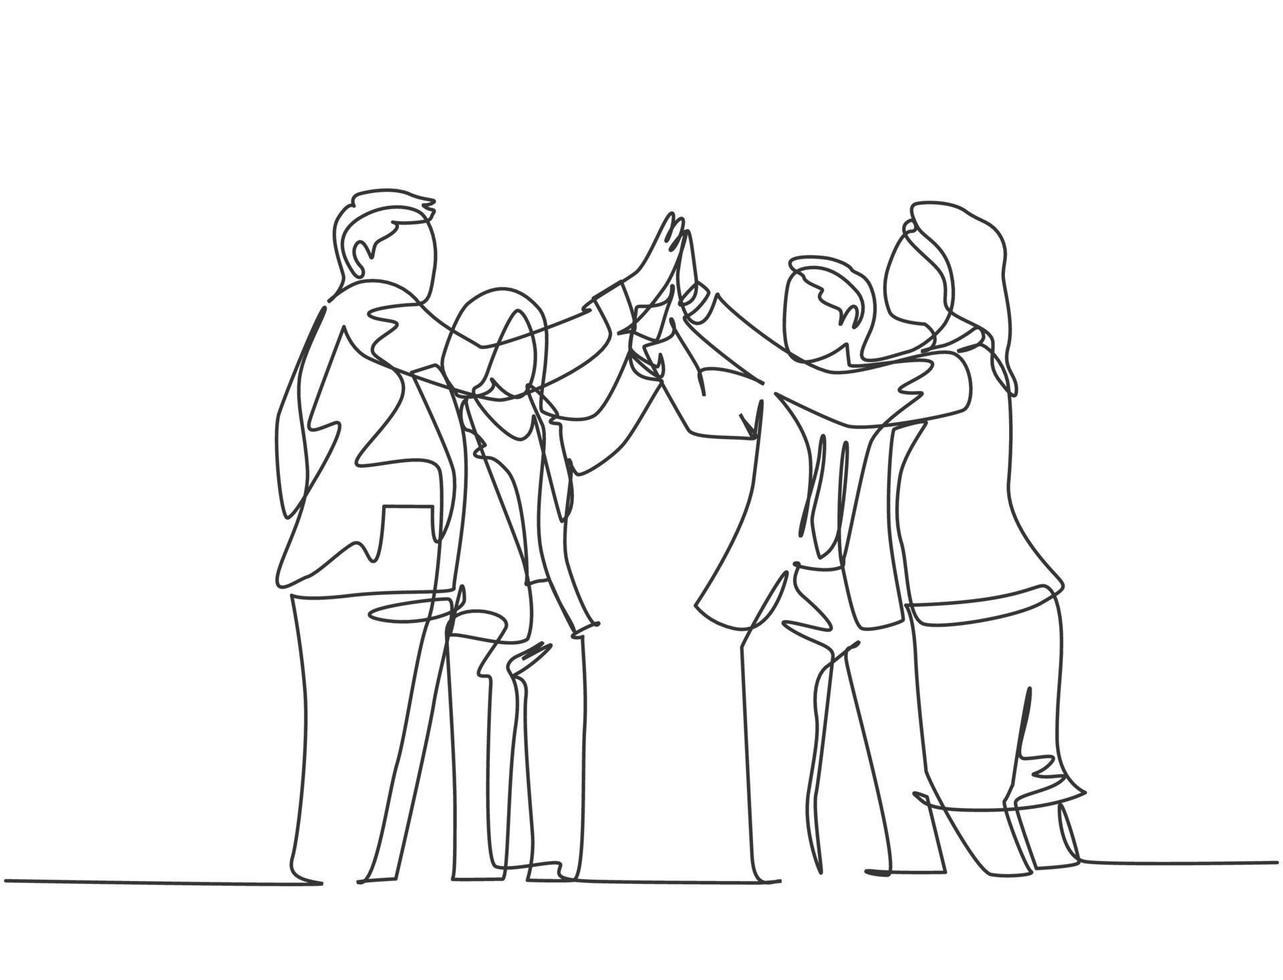 One line drawing of young businessmen and businesswomen celebrating their successive goal at the business meeting with high five gesture. Business deal concept continuous line draw design illustration vector